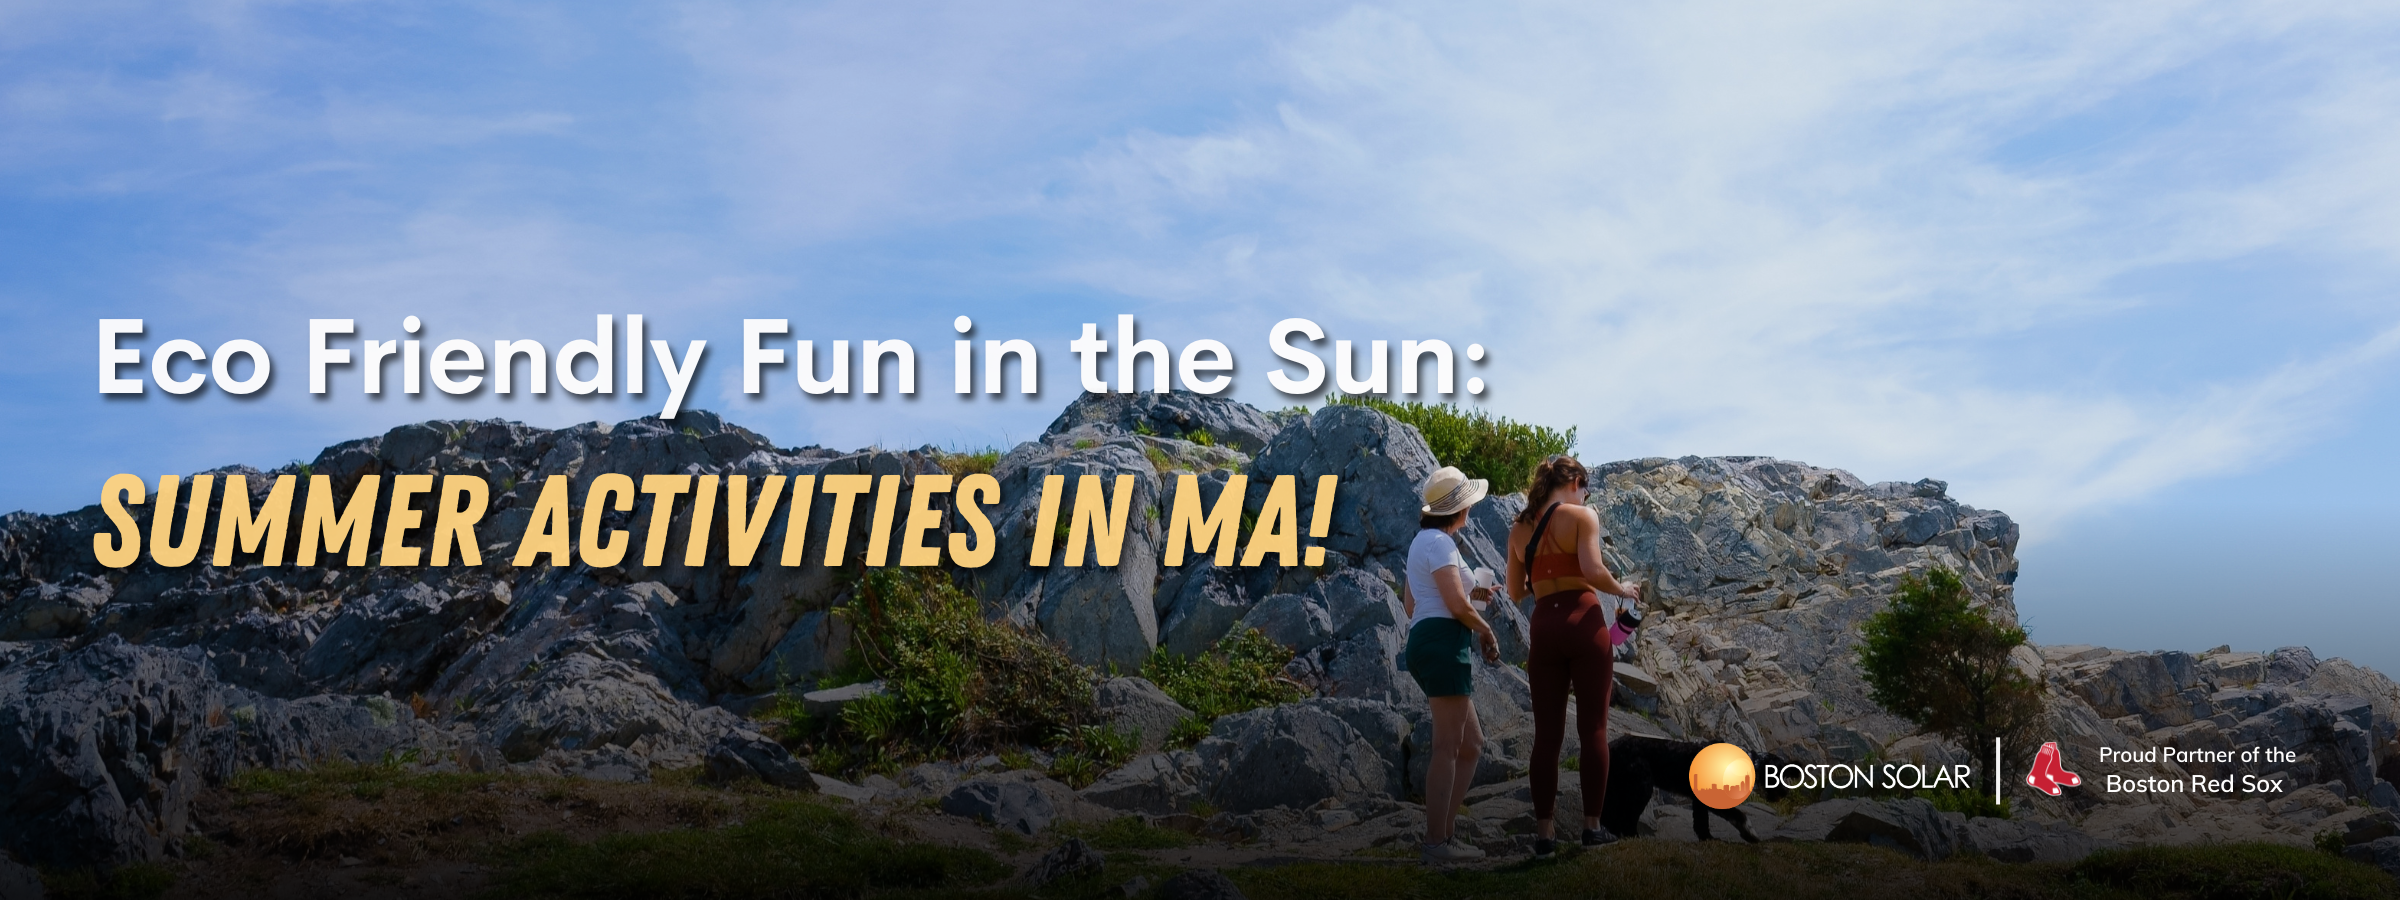 Eco-Friendly Fun in the Sun: Summer Activities That Support Sustainability in Massachusetts